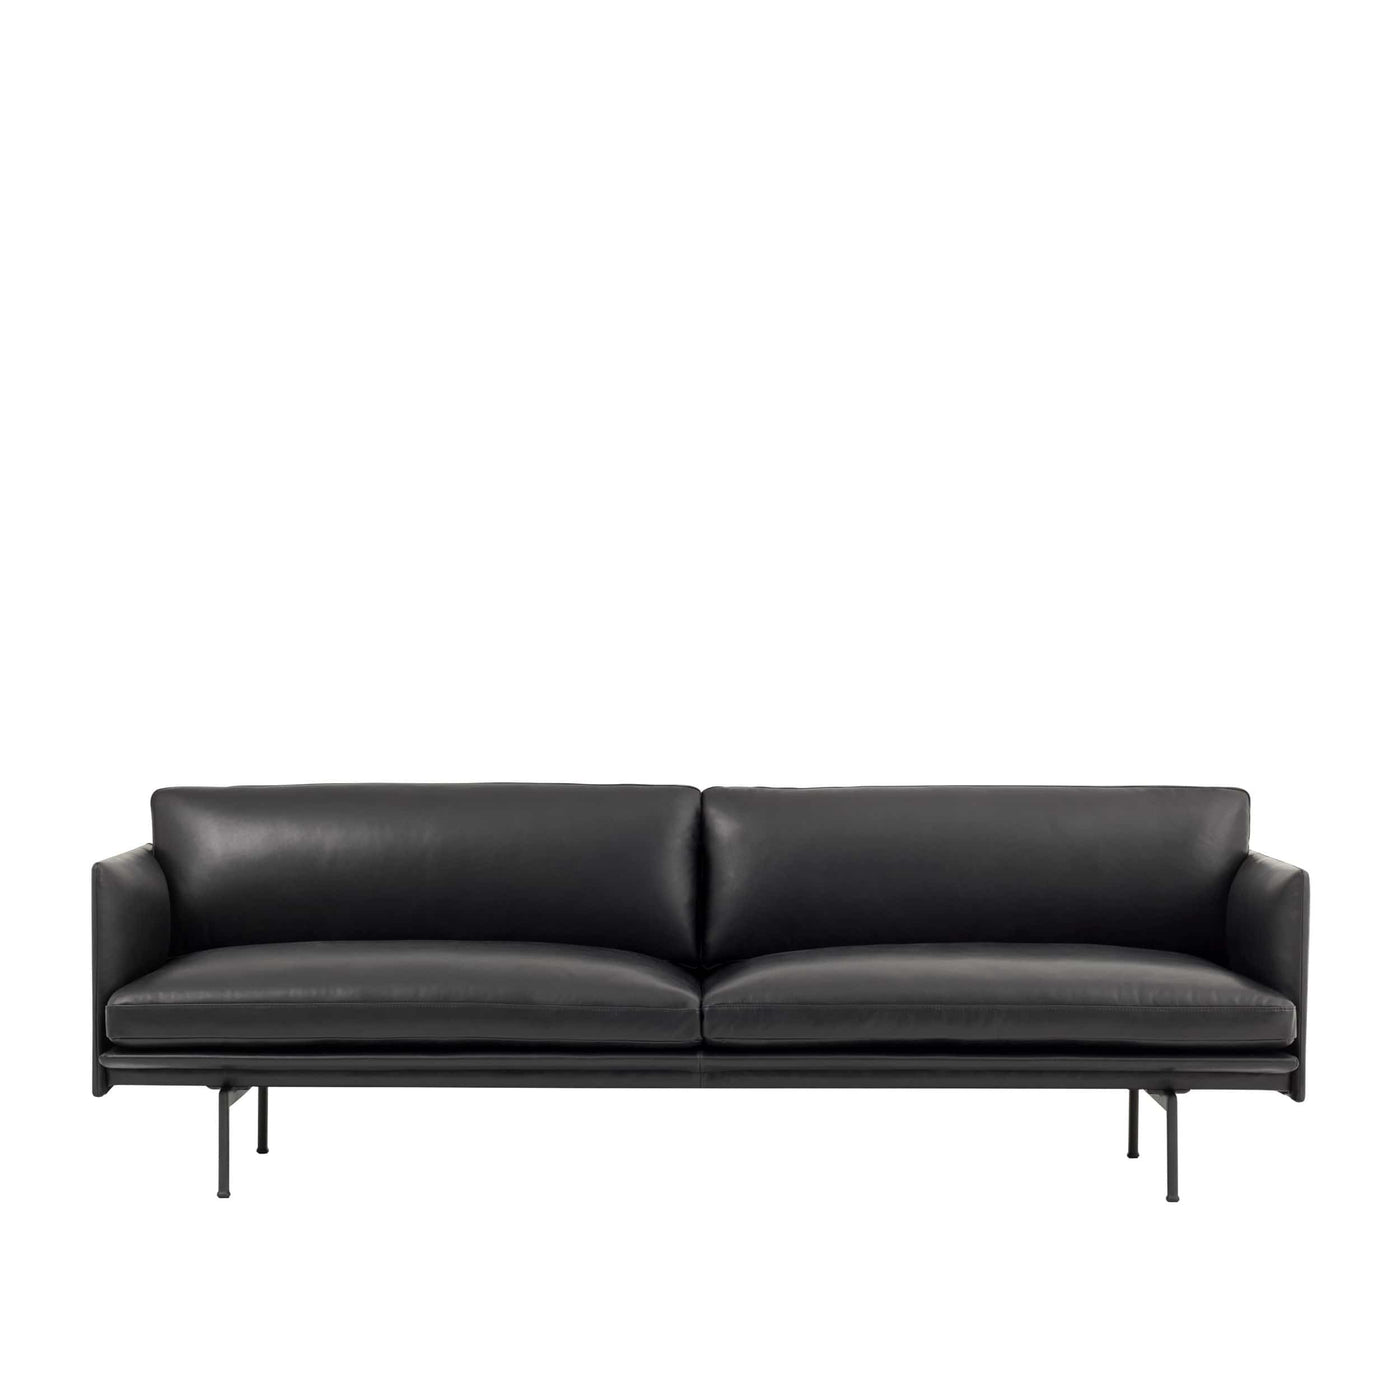 Muuto Outline 3 Seater Sofa in Black Refine Leather. Made to order from someday designs